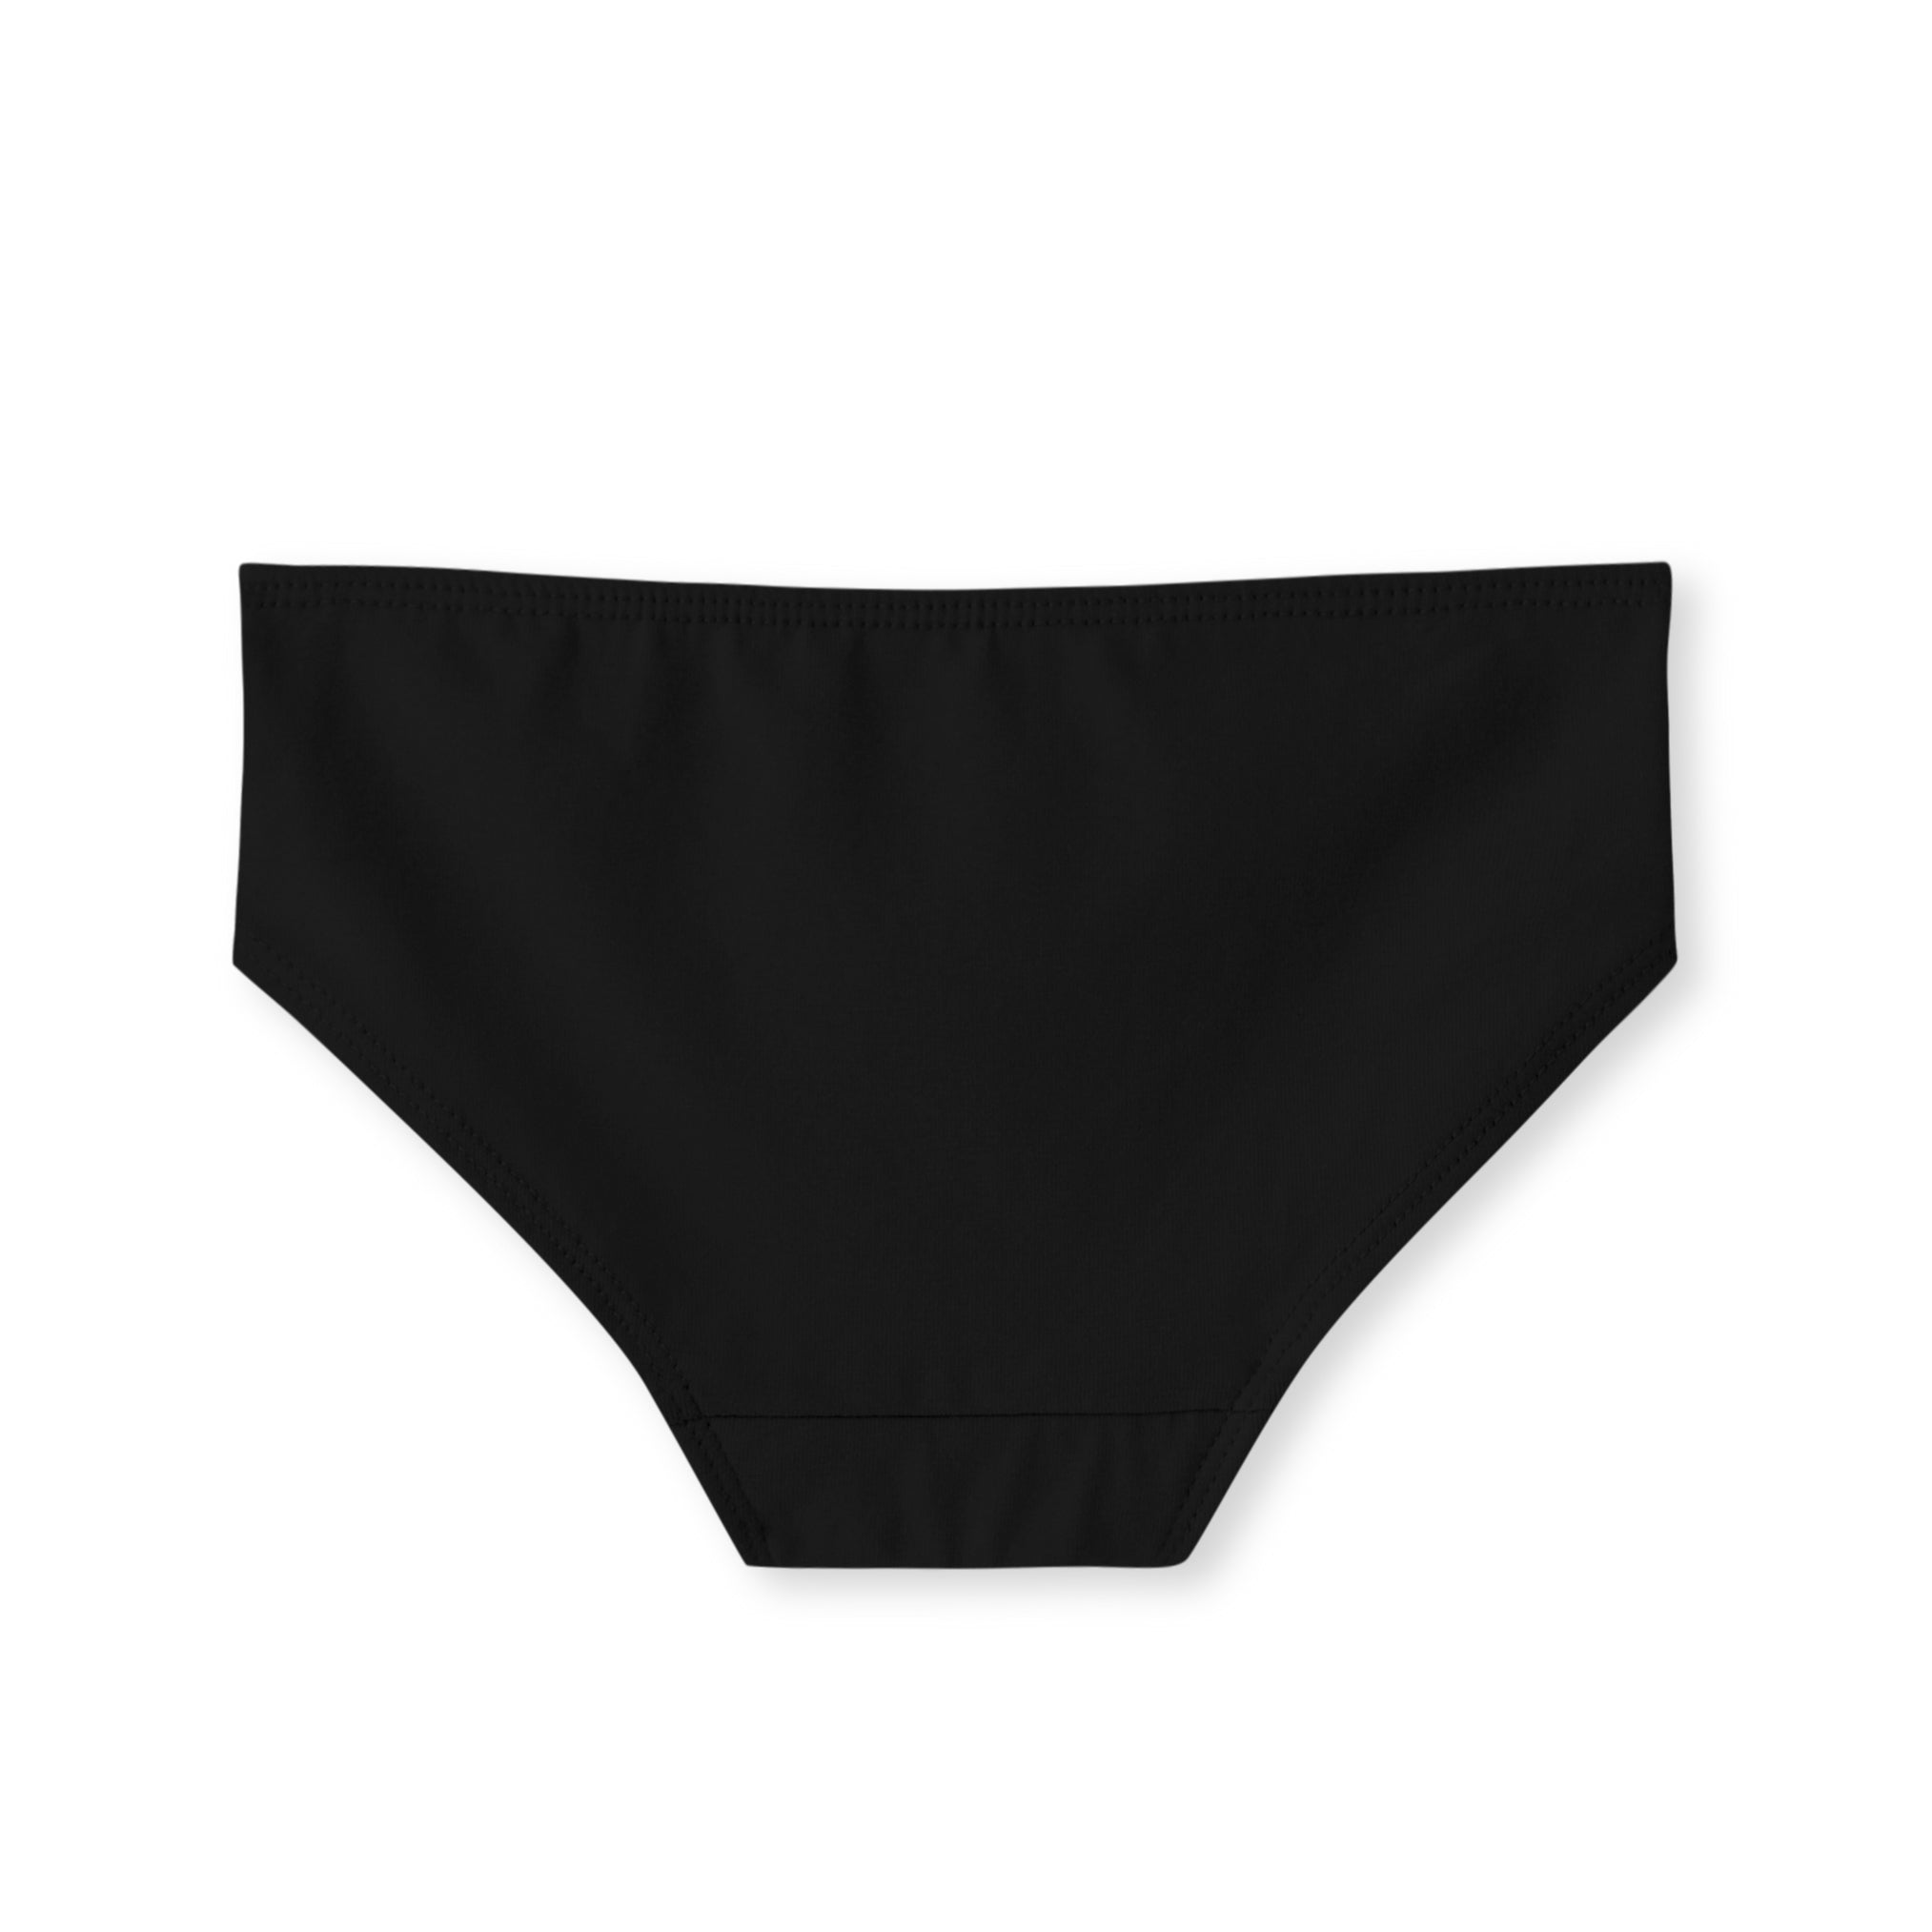 Underwear Women's - Buy Now Pay Later at Masseys